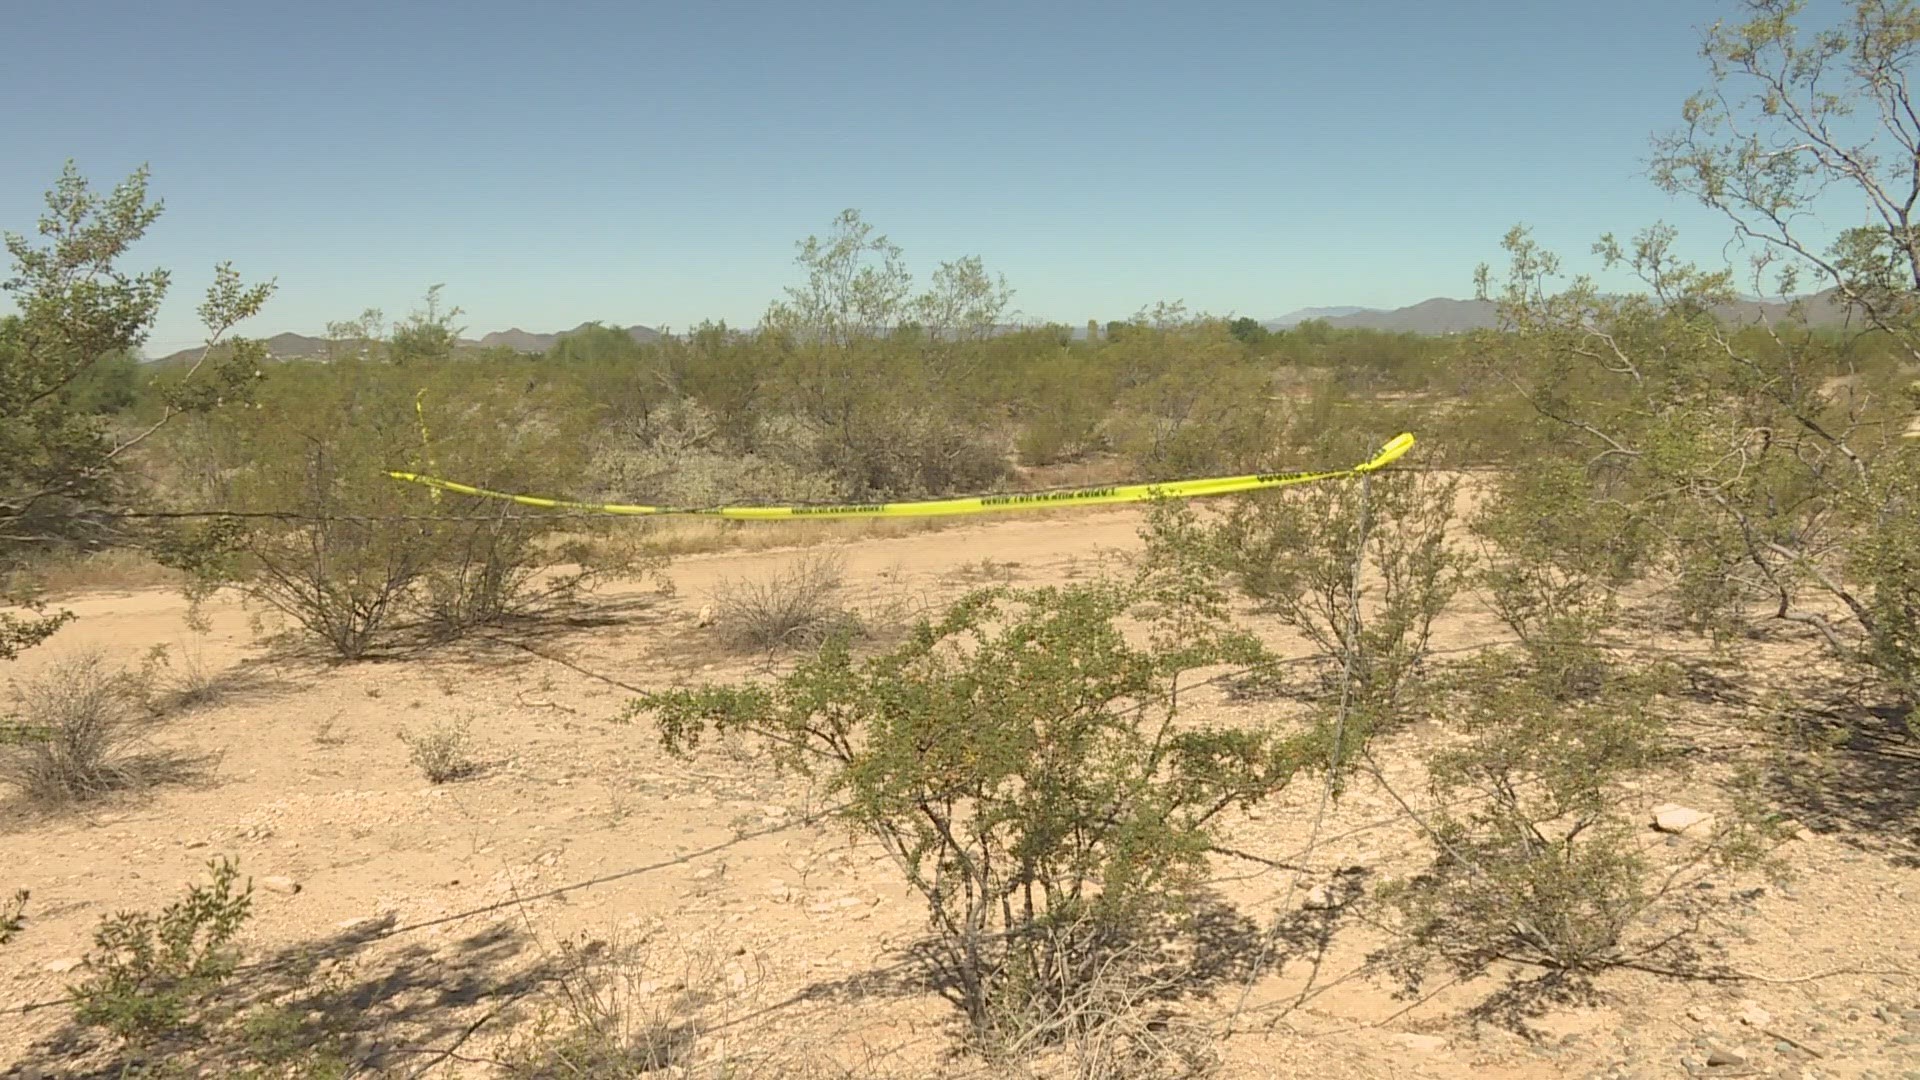 It's been just over a year since a bicyclist found Jennifer Beede’s body in a suitcase in the desert.